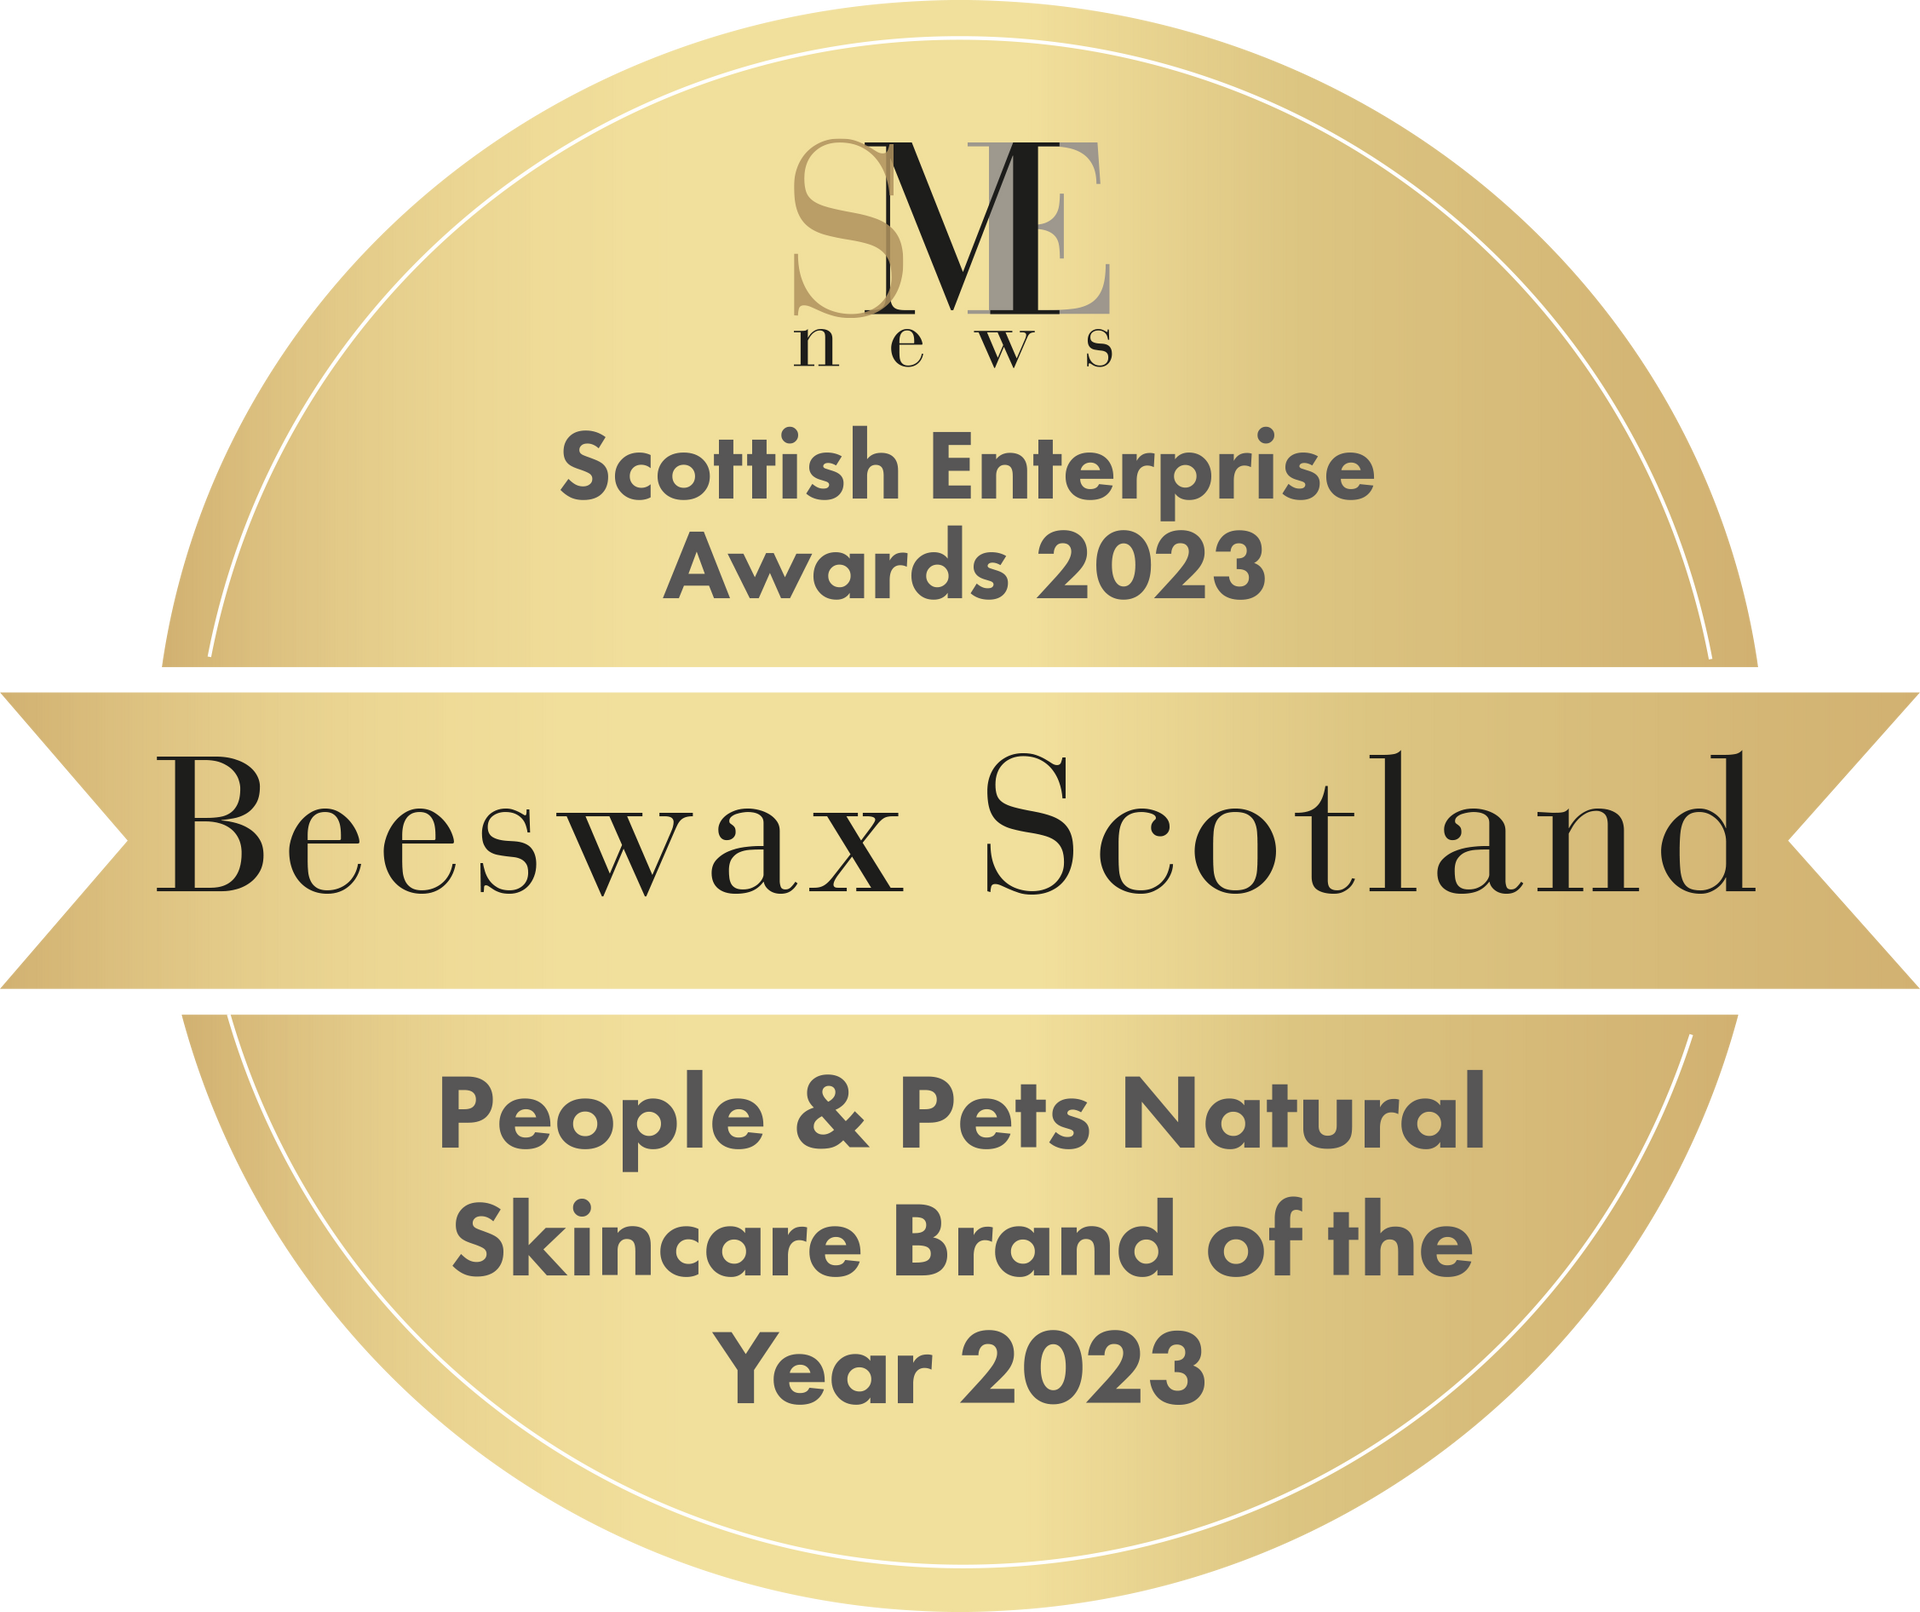 Very Proud to share our latest award. People & Pets Natural Skincare Brand of the Year 2023